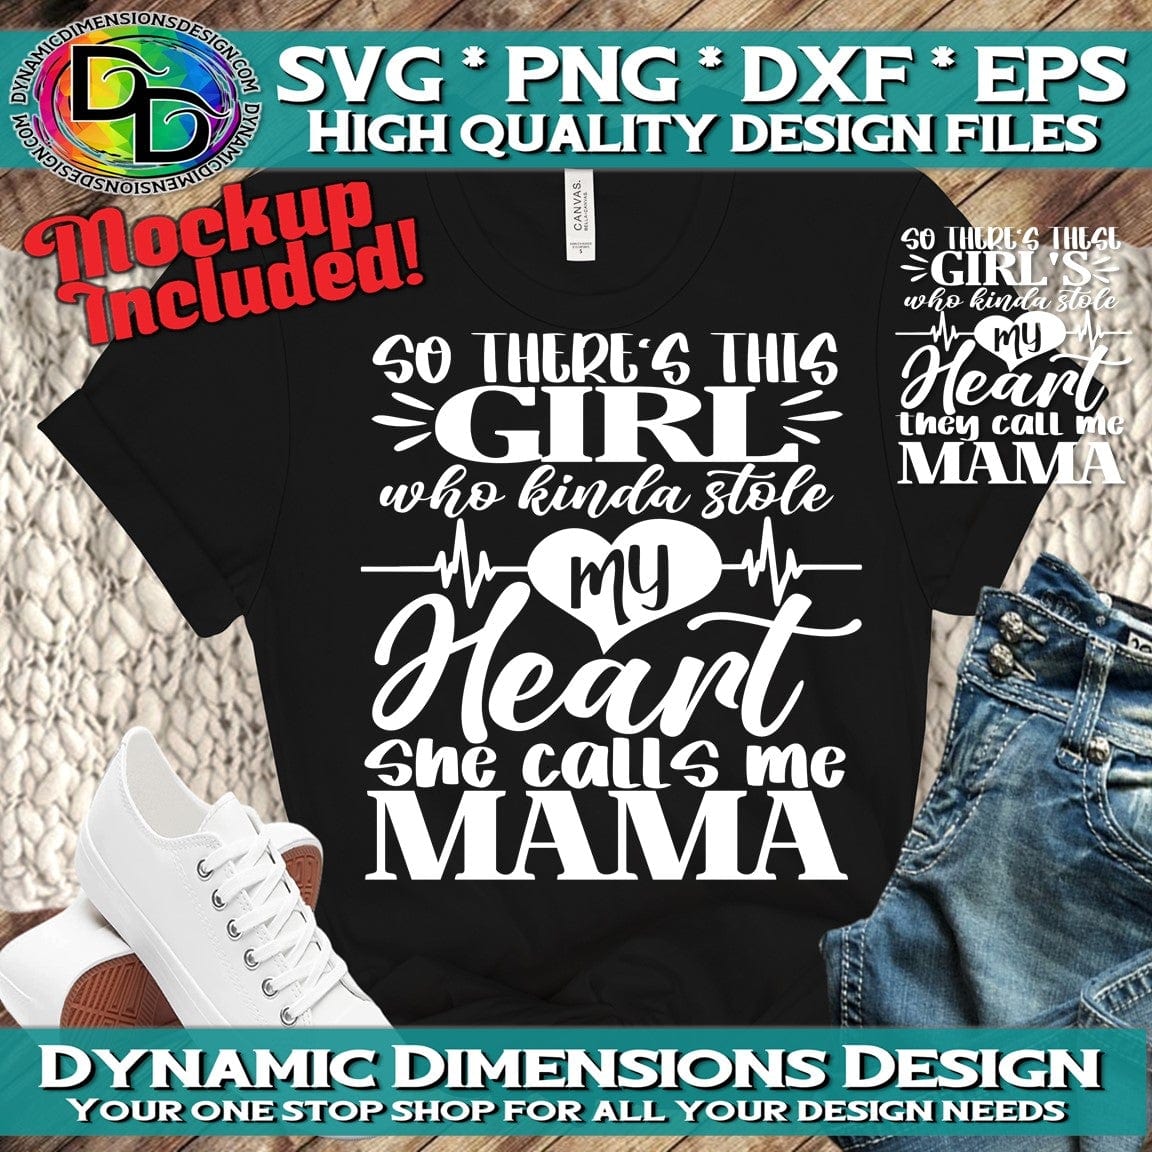 Girl Stole My Heart _ Calls me Mama svg, png, instant download, dxf, eps, pdf, jpg, cricut, silhouette, sublimtion, printable